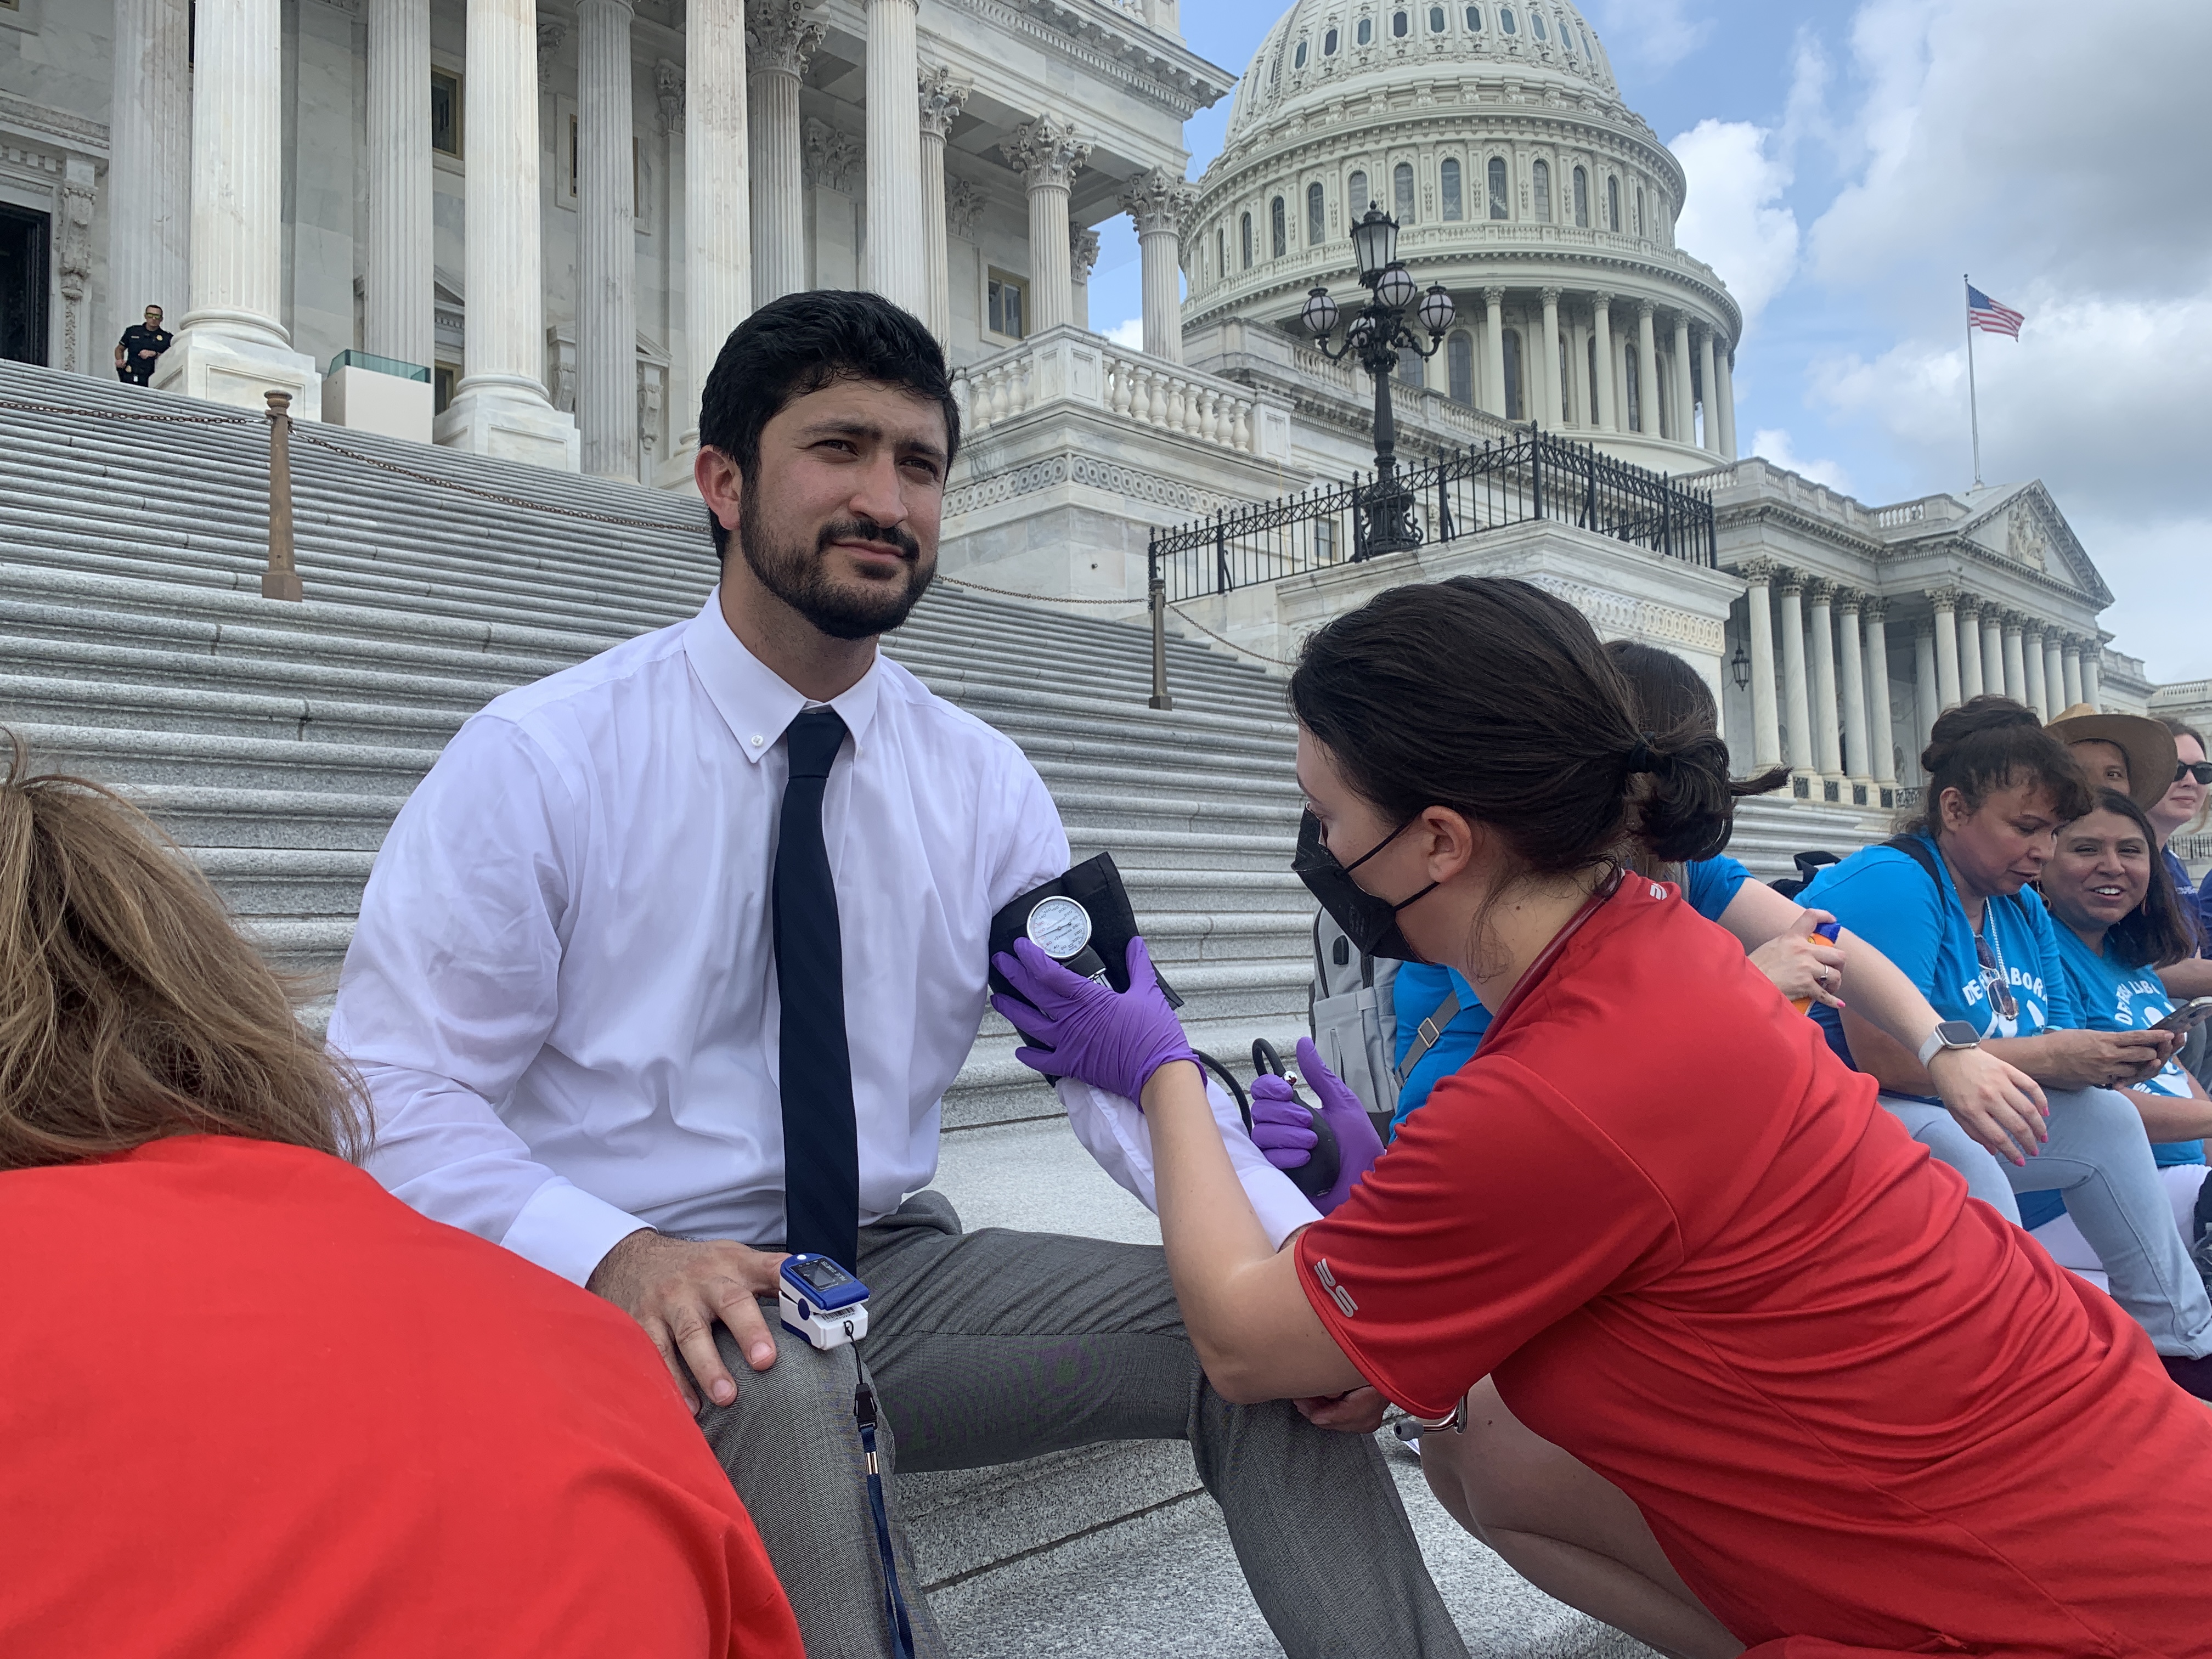 A registered nurse monitors on Rep. Greg Casar's heath while he sits on the steps of the U.S. Capitol.